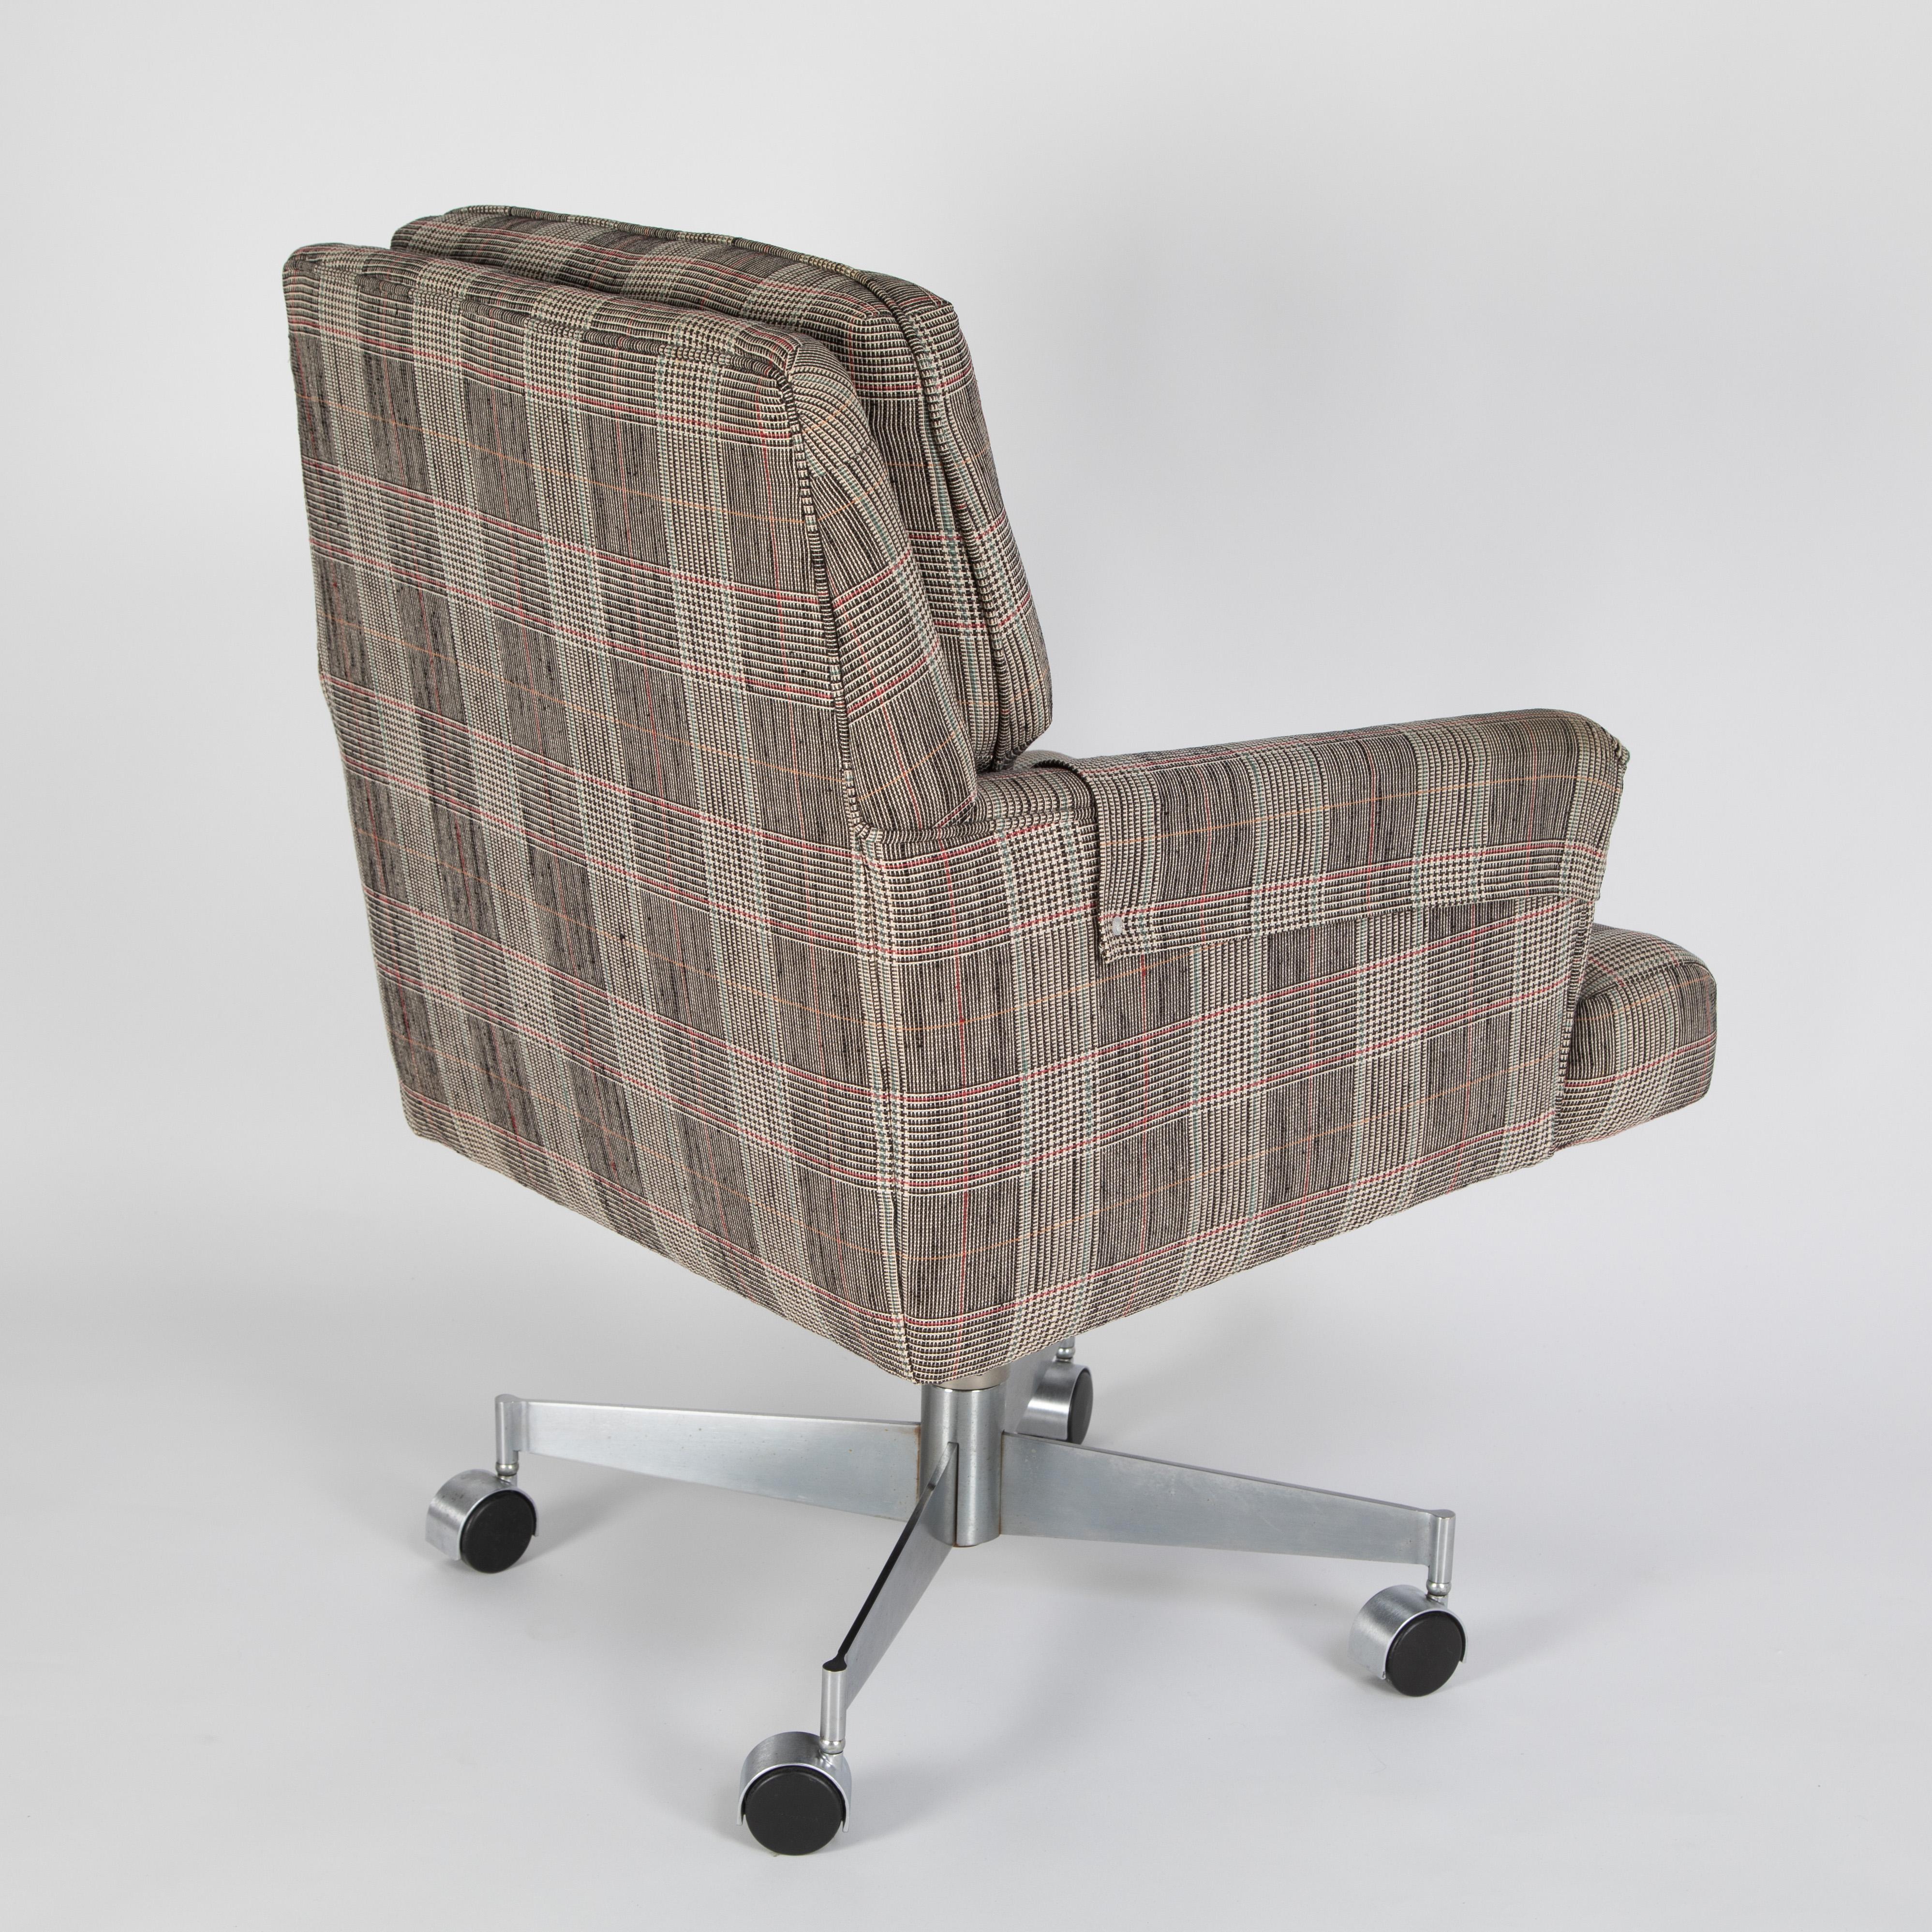 Brushed Executive Office Chair by Edward Wormley for Dunbar, circa 1960s